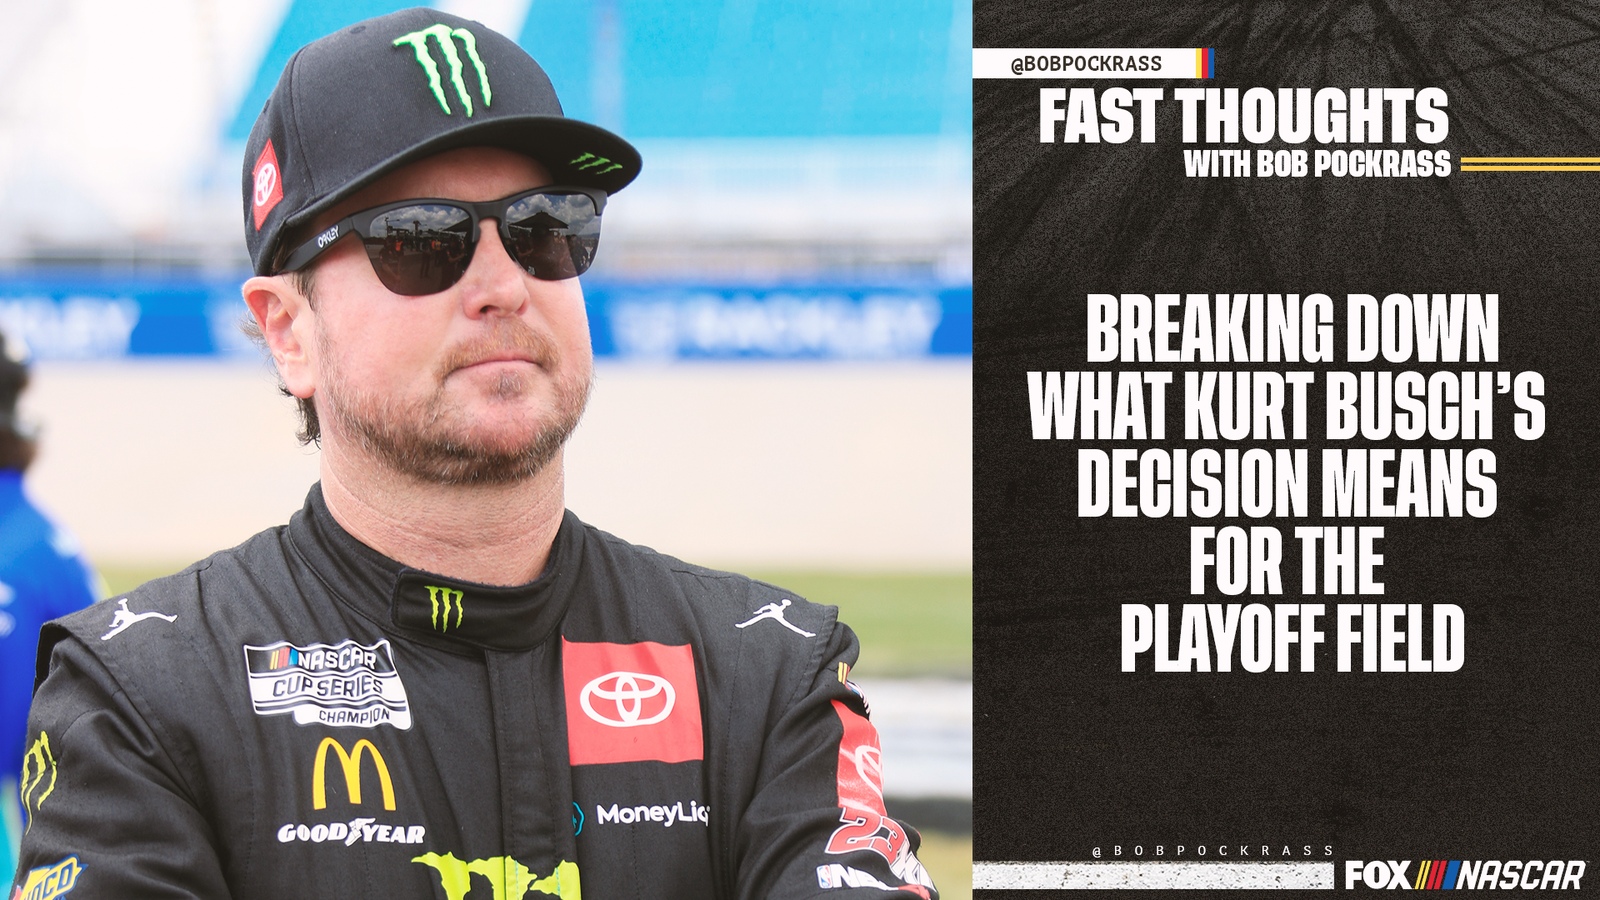 What Kurt Busch's withdrawal means for the NASCAR playoff field